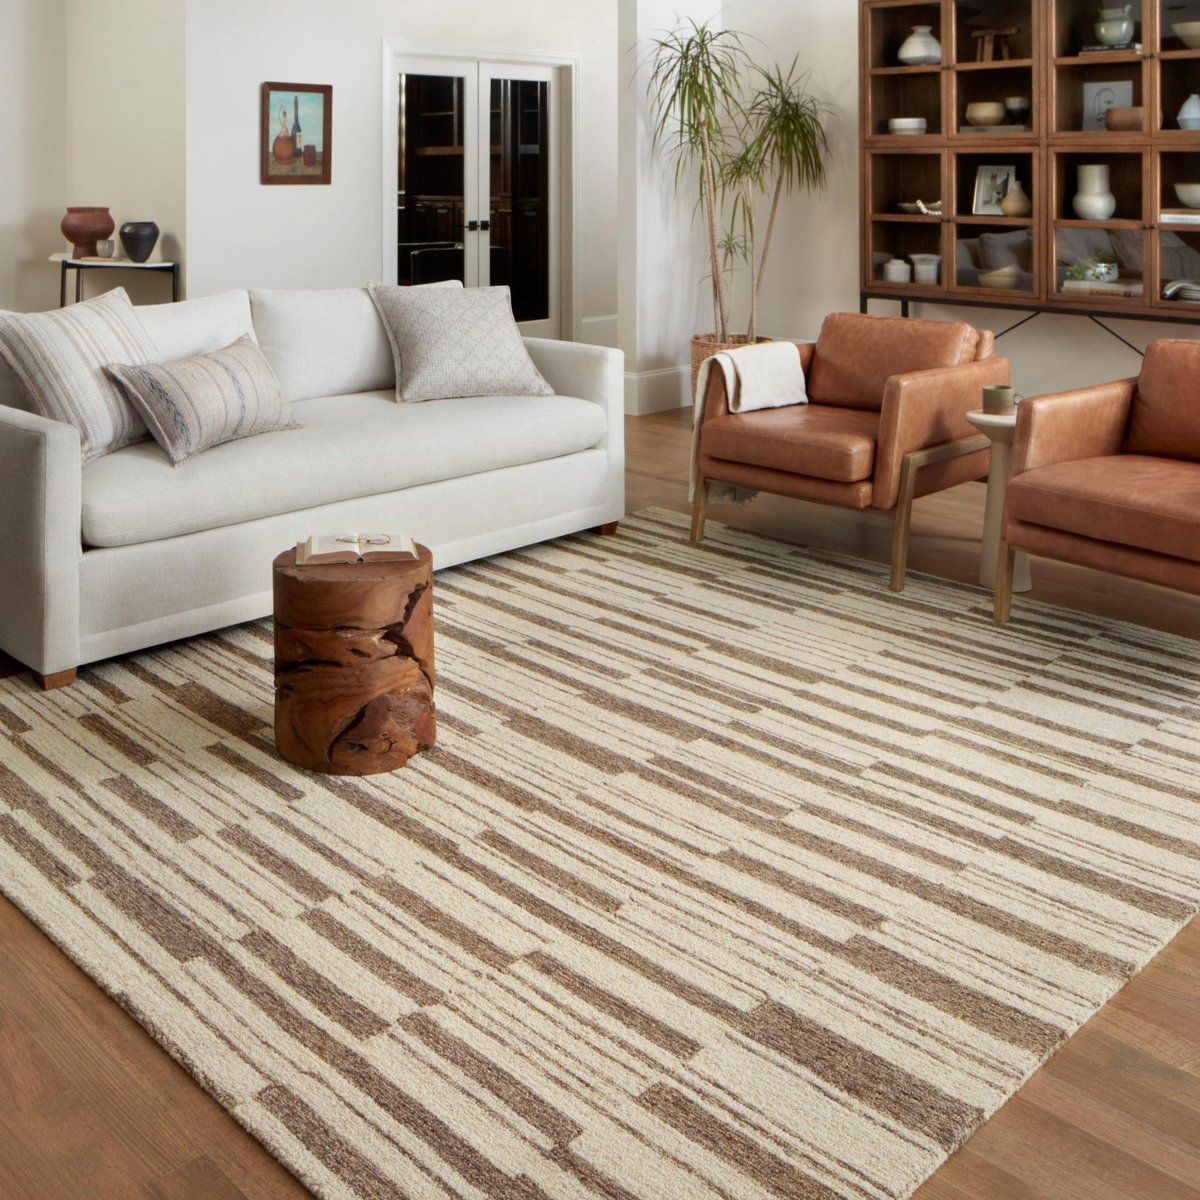 Polly - POL-04 Area Rug | Rugs Direct